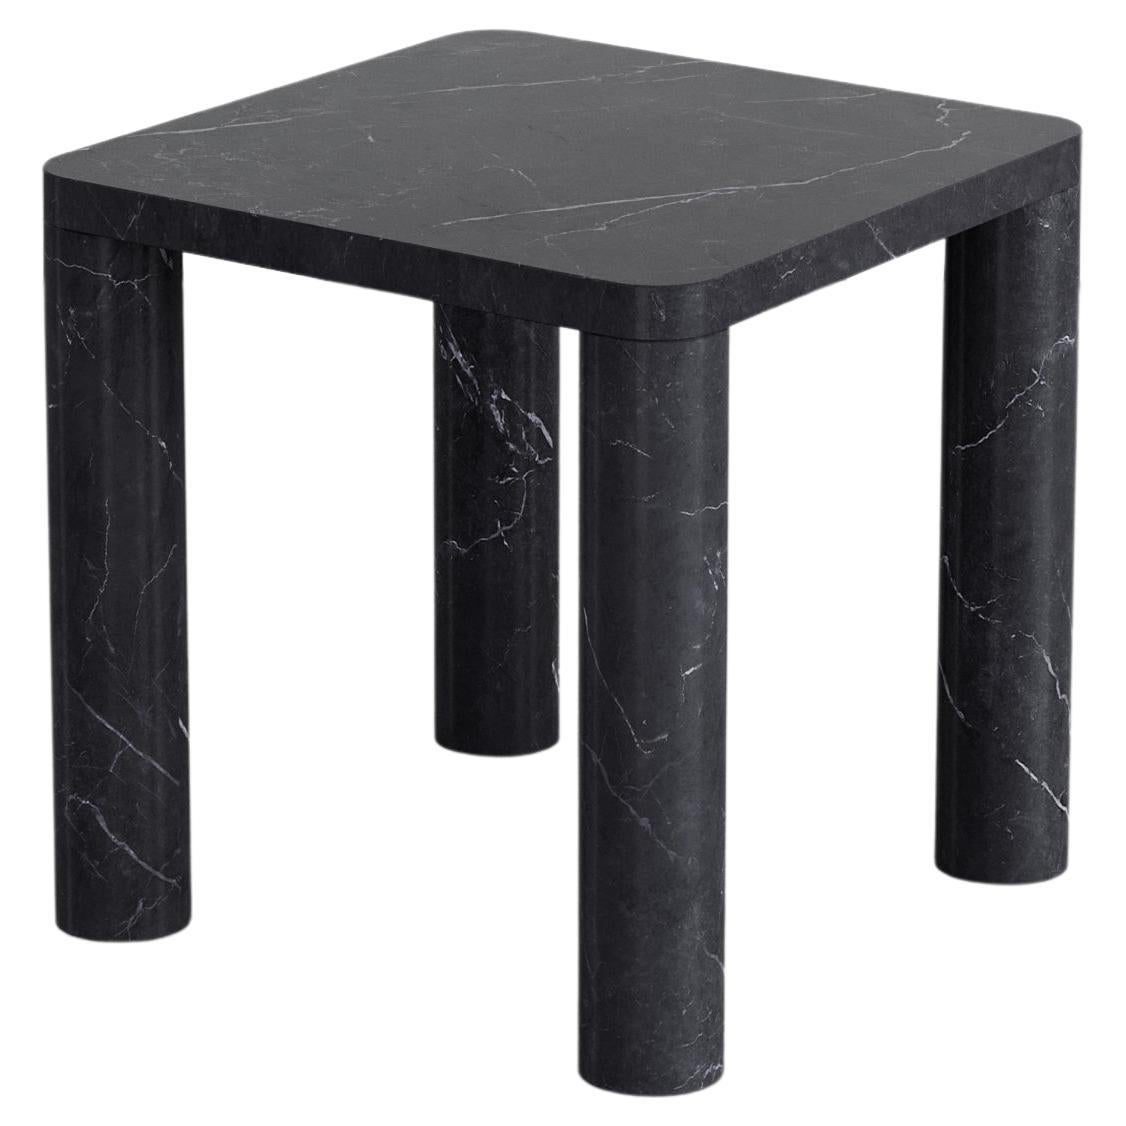 Nadia 45 Marble Side Table by Agglomerati For Sale